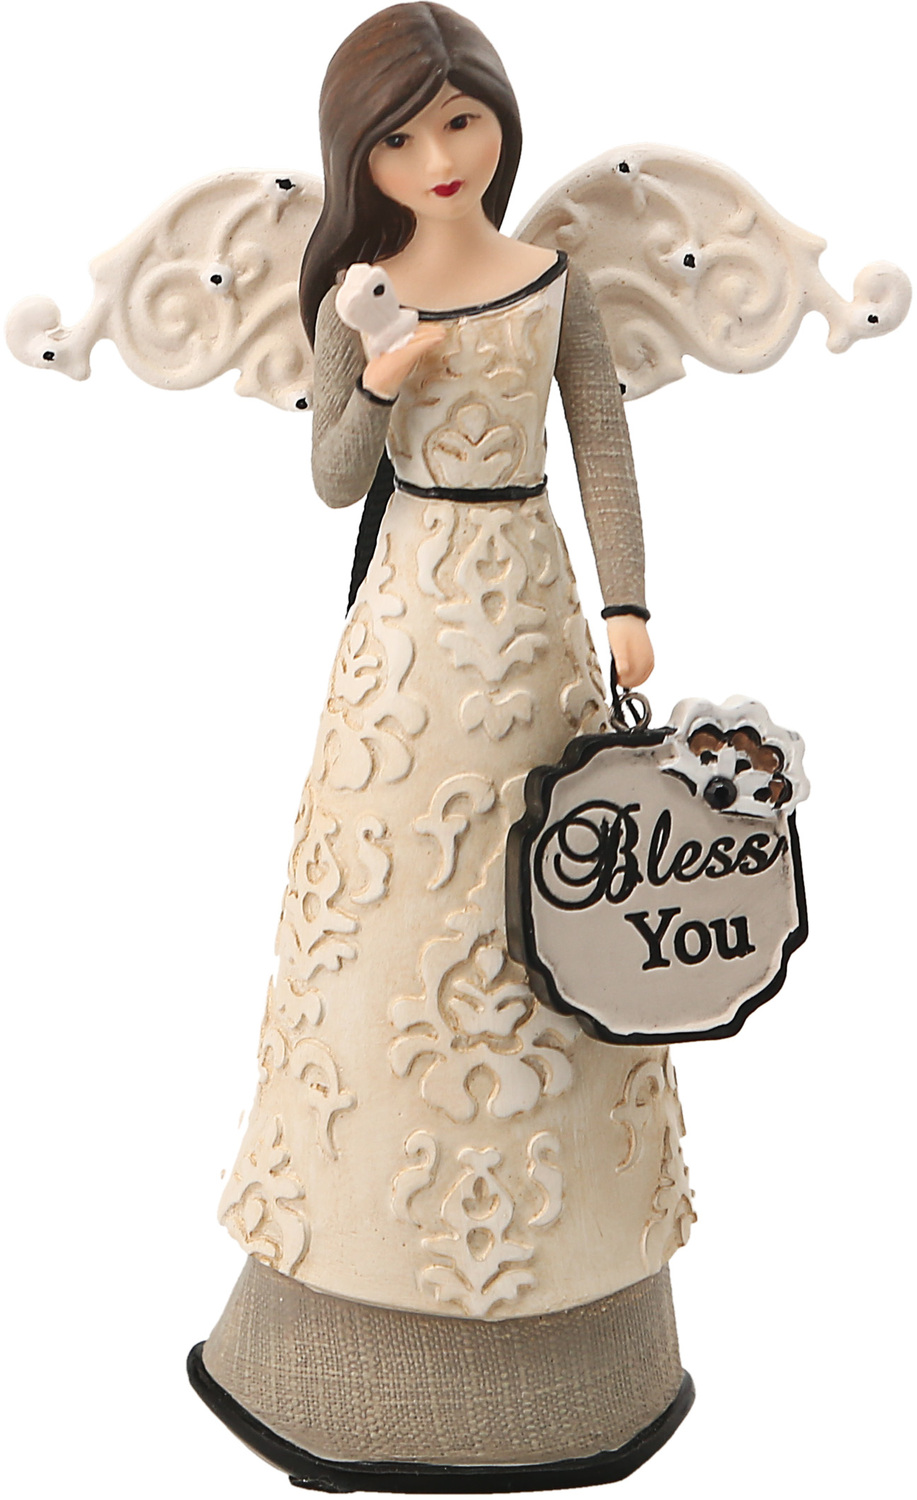 Bless You by Modeles - Bless You - 4.5" Angel Holding Butterfly Ornament